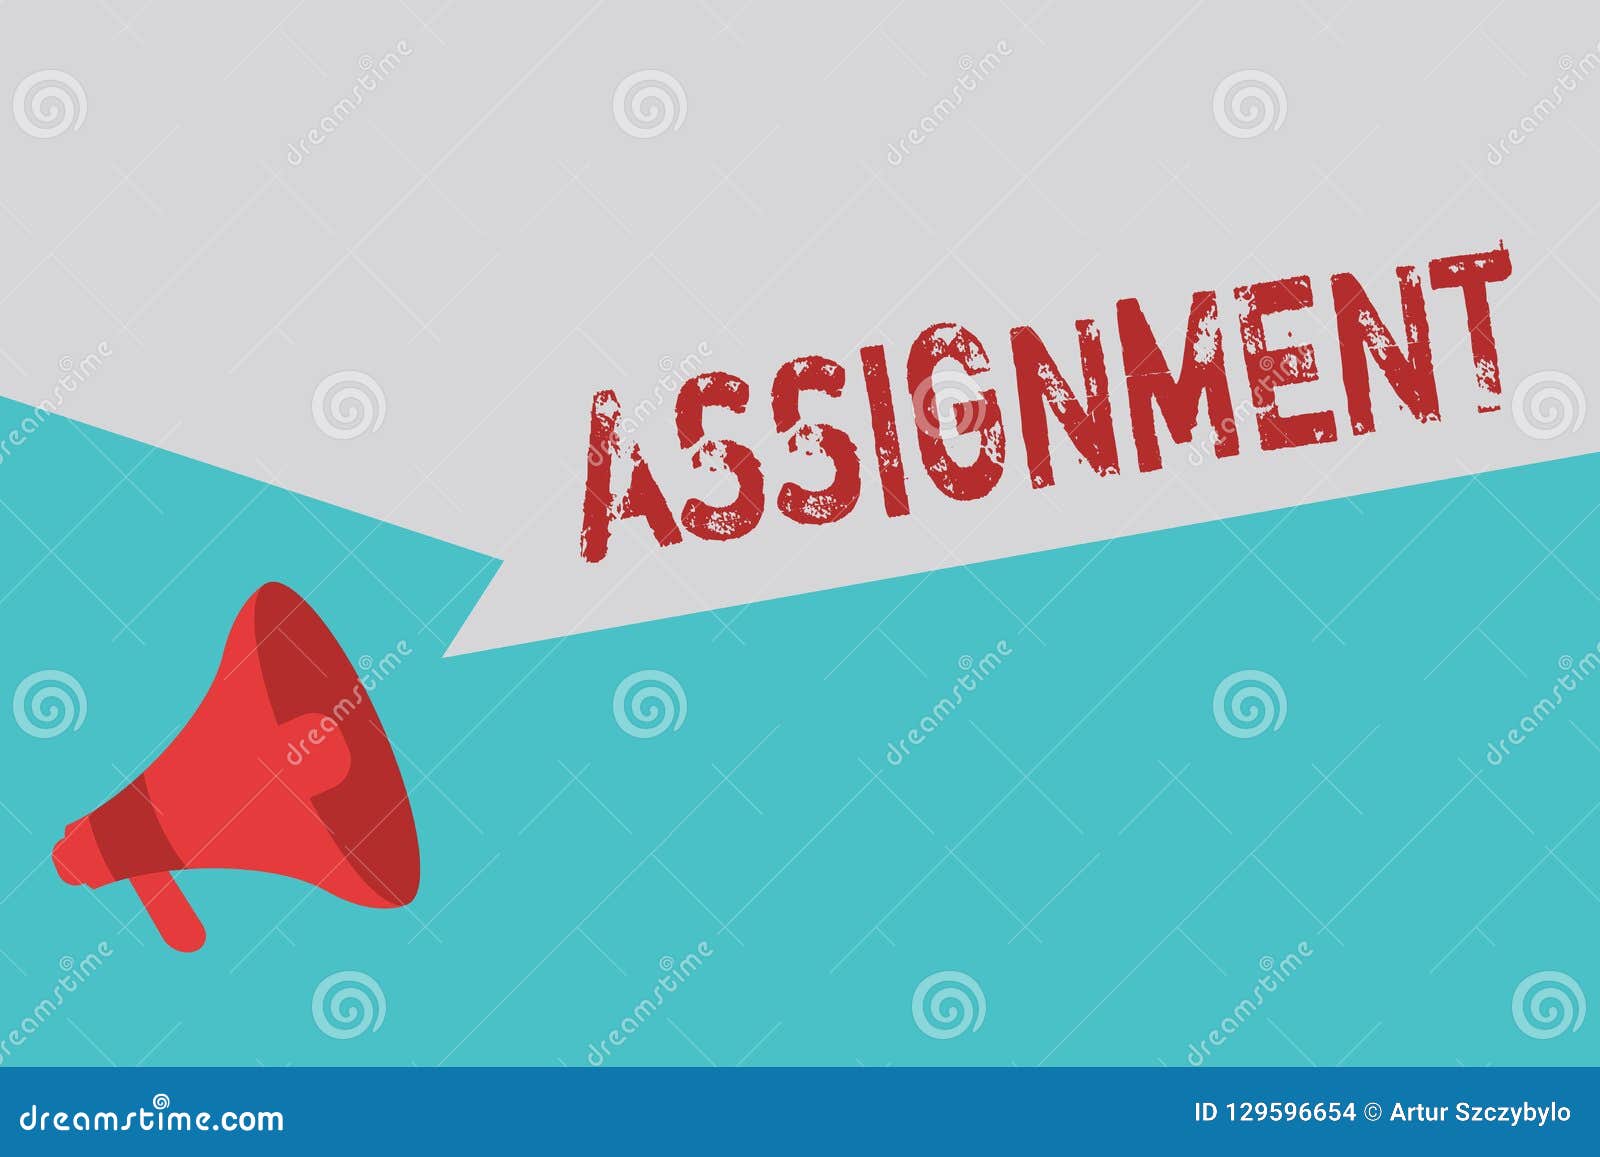 assigned job meaning